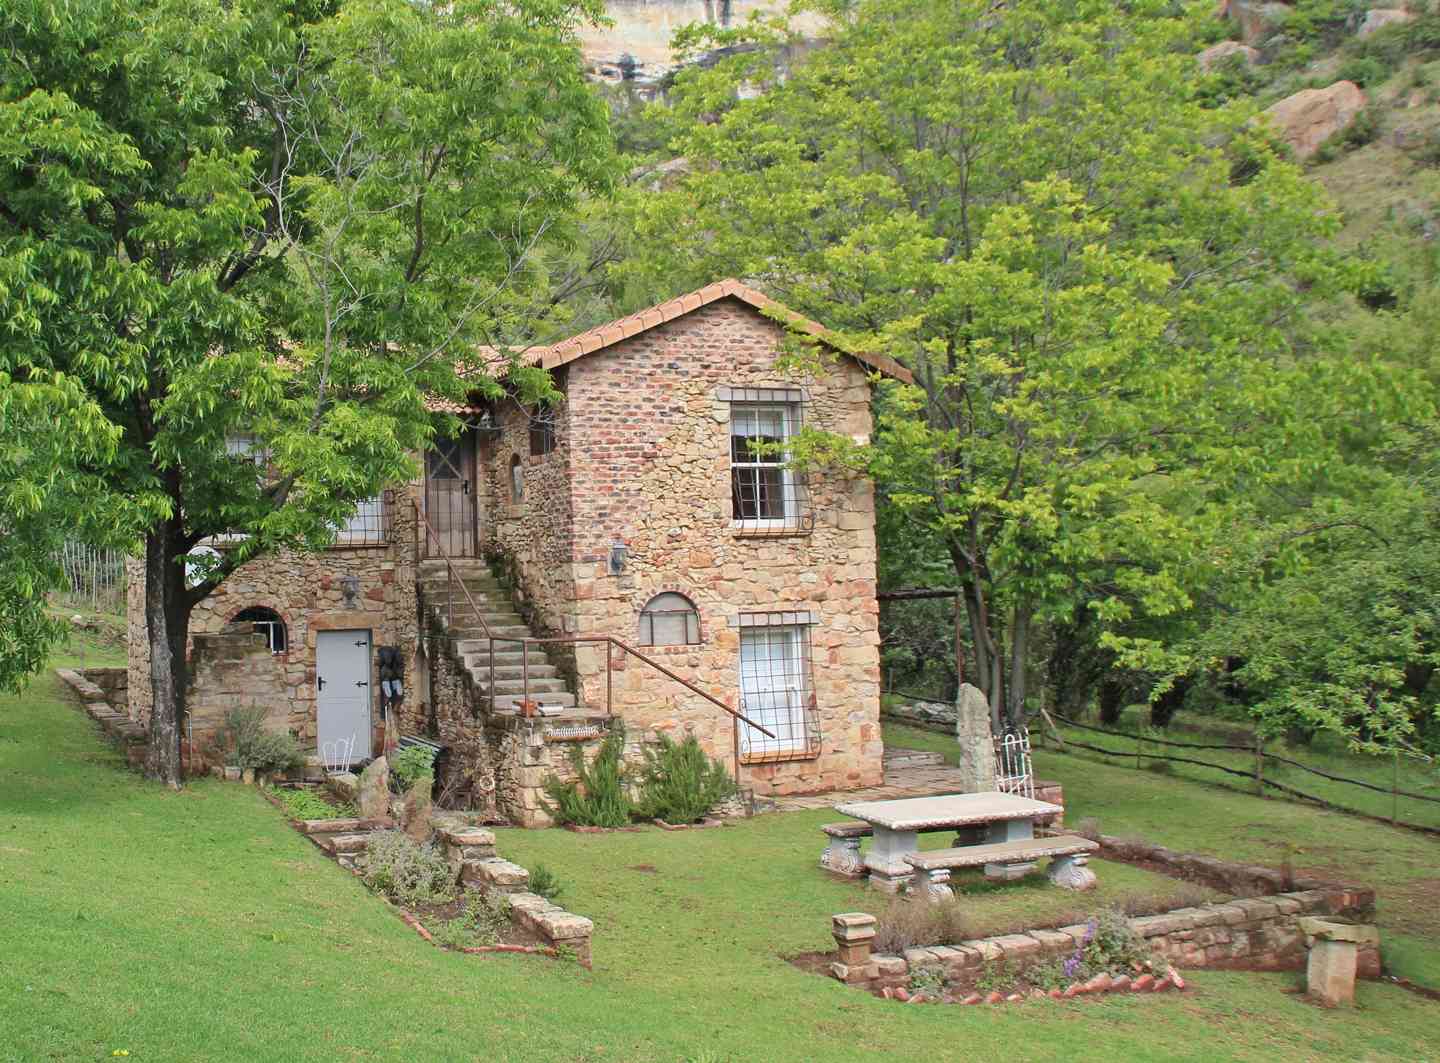 The French Cottage in Clarens